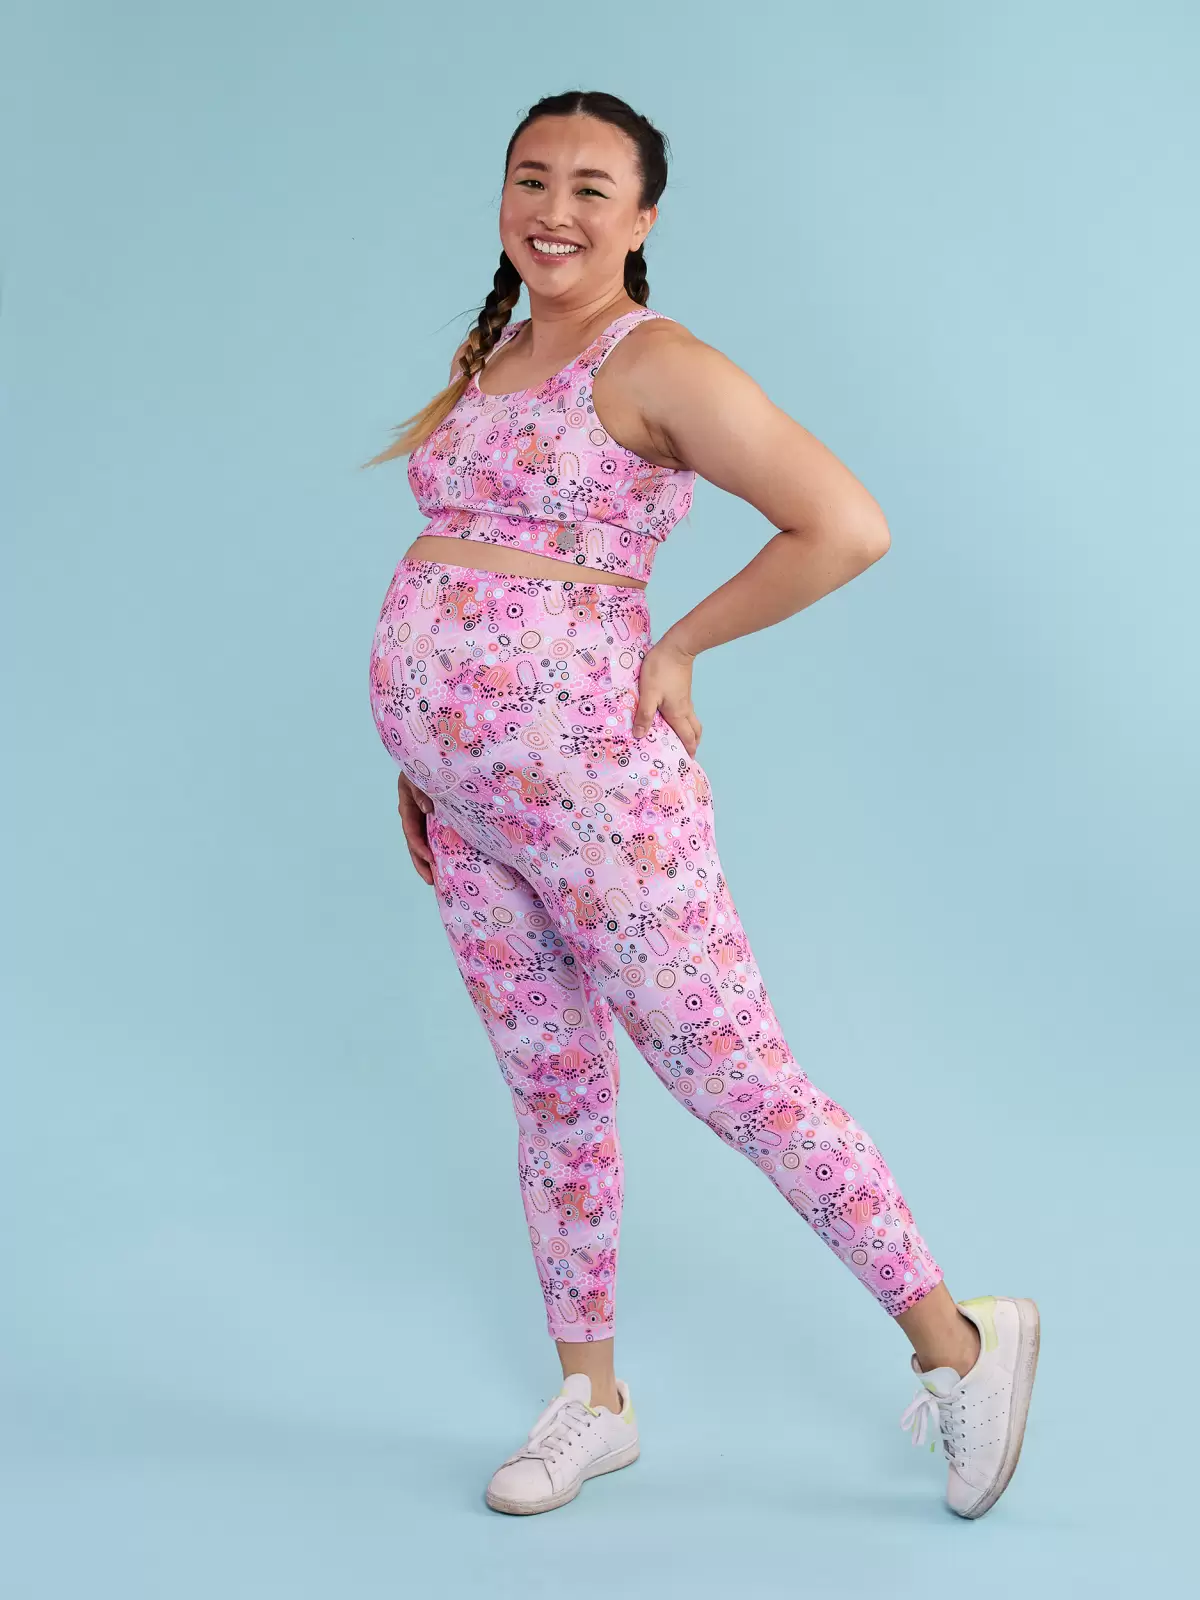 he Emamaco Guide To Buying Maternity Leggings Online